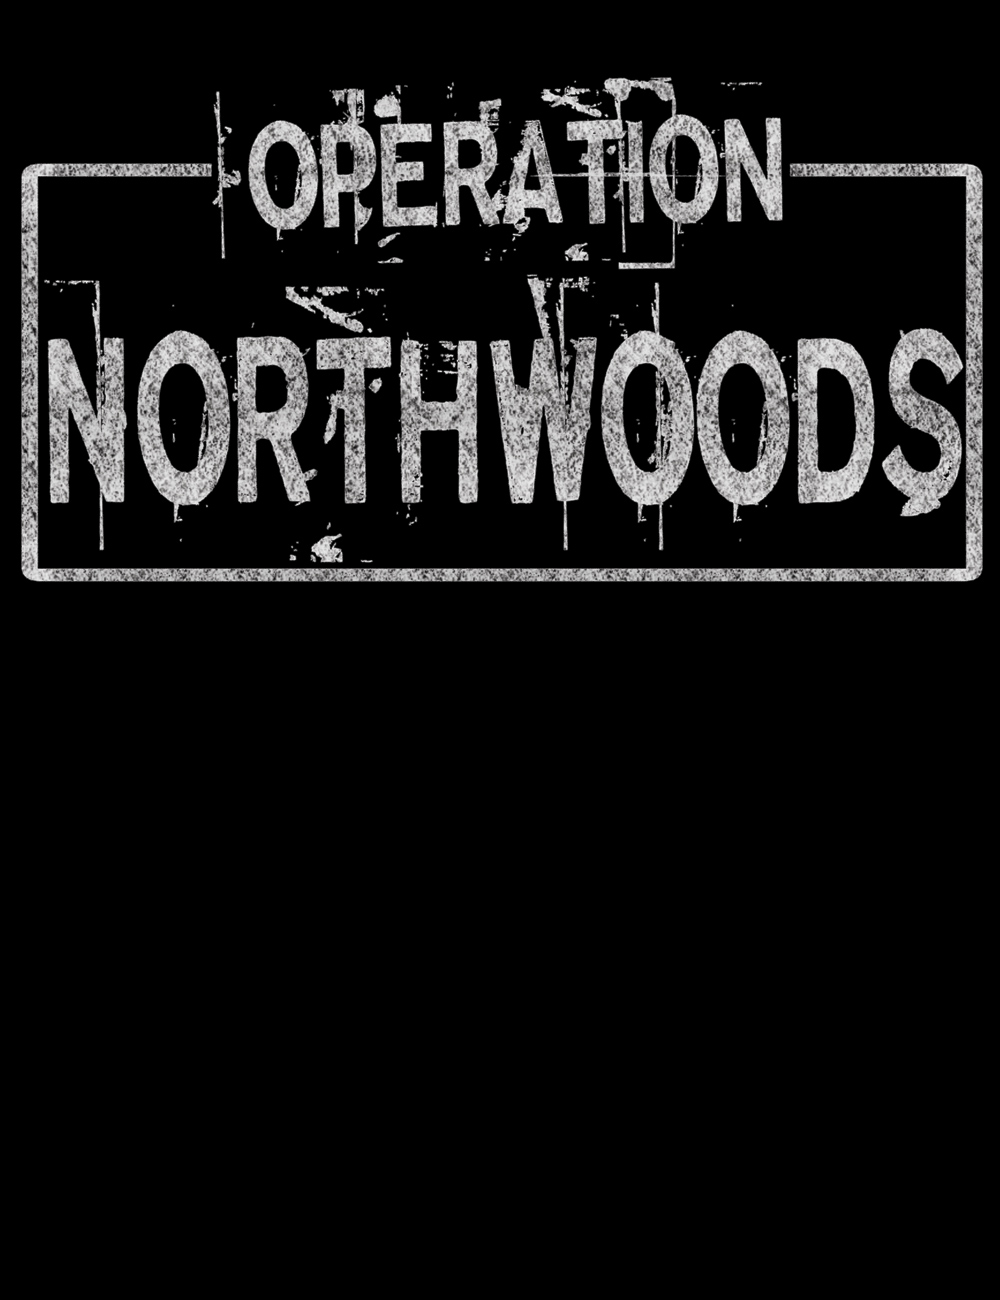 Operation Northwoods T-Shirt - Hellwood Outfitters